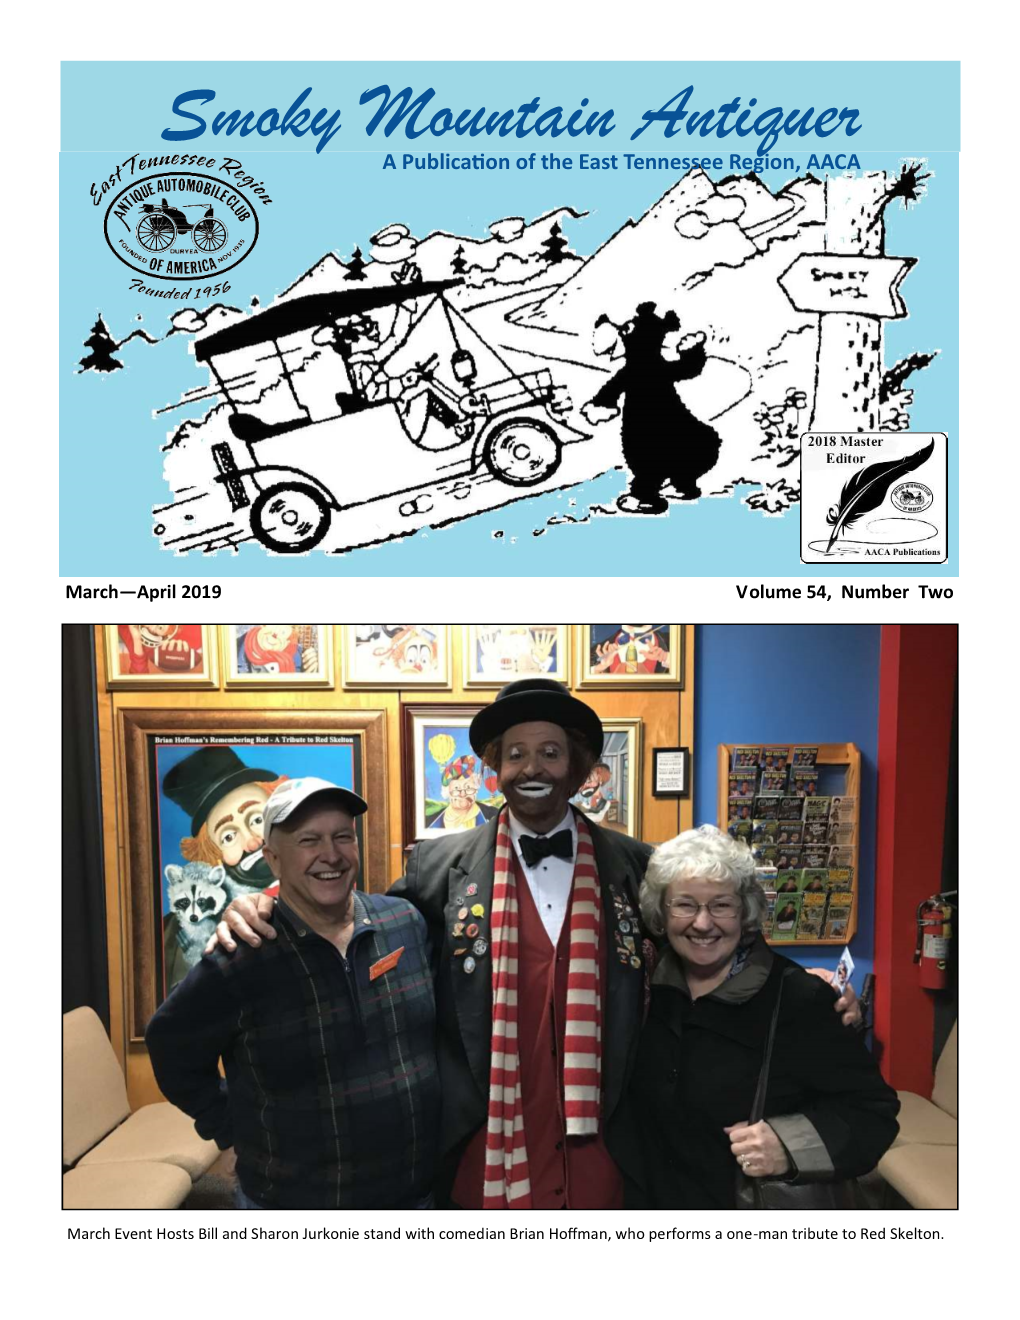 Smoky Mountain Antiquer a Publication of the East Tennessee Region, AACA